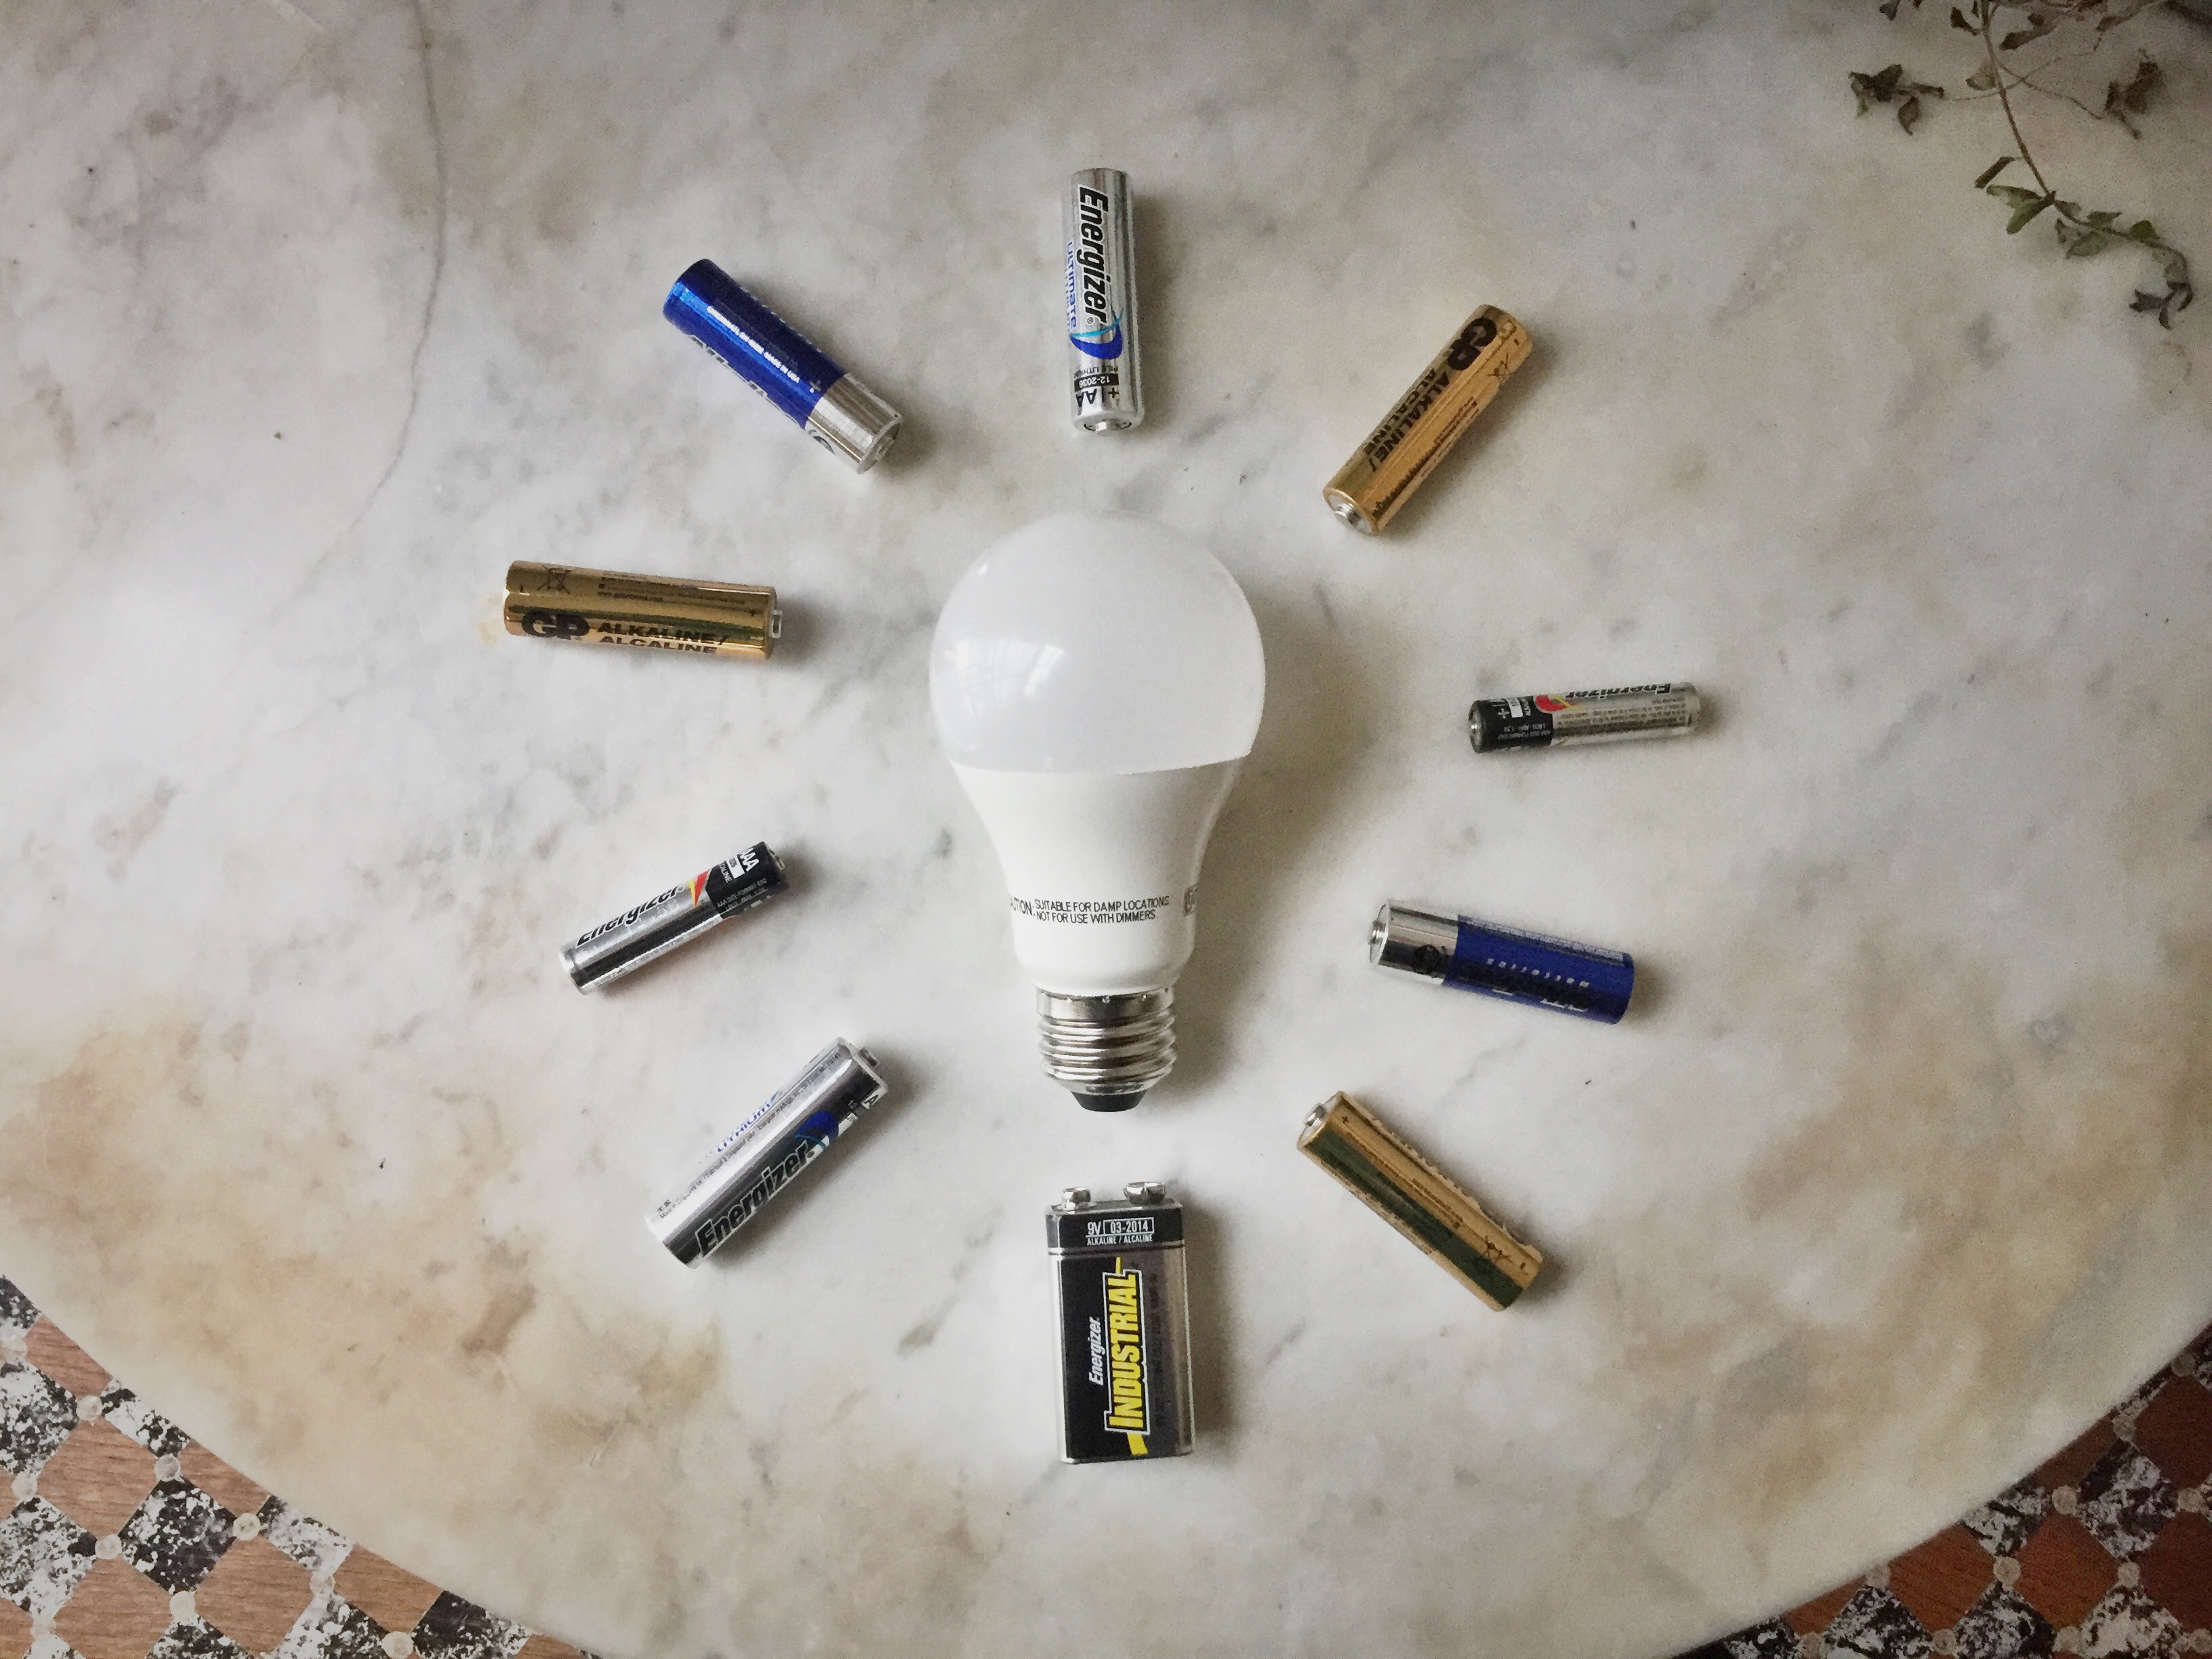 Products like lightbulbs and batteries require unique recycling methods.